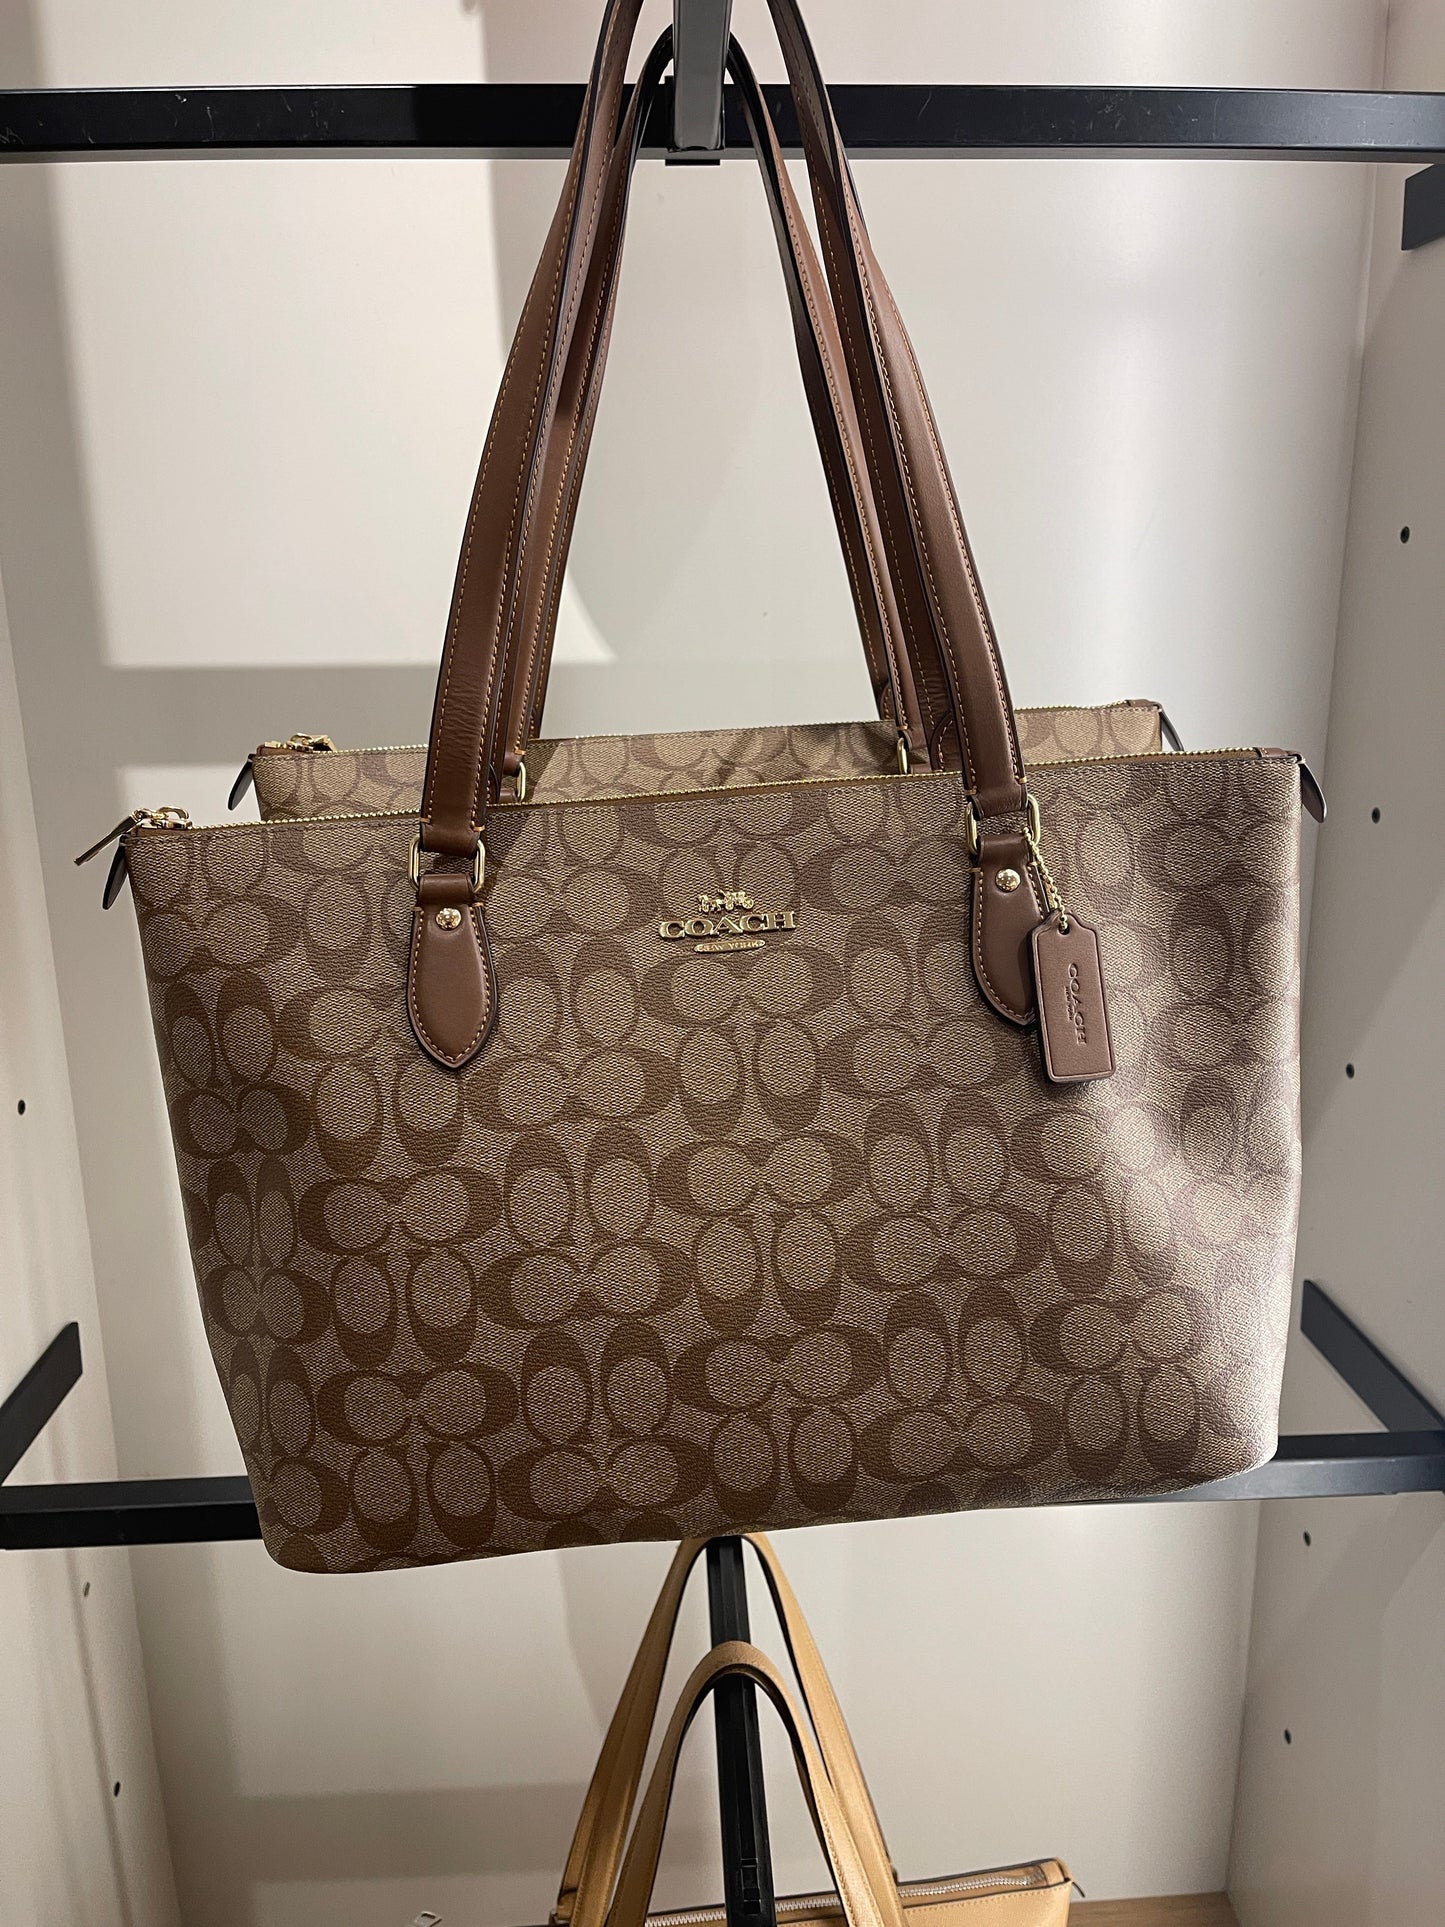 Load image into Gallery viewer, Coach New Gallery Tote In Signature Khaki Saddle (Pre-order)
